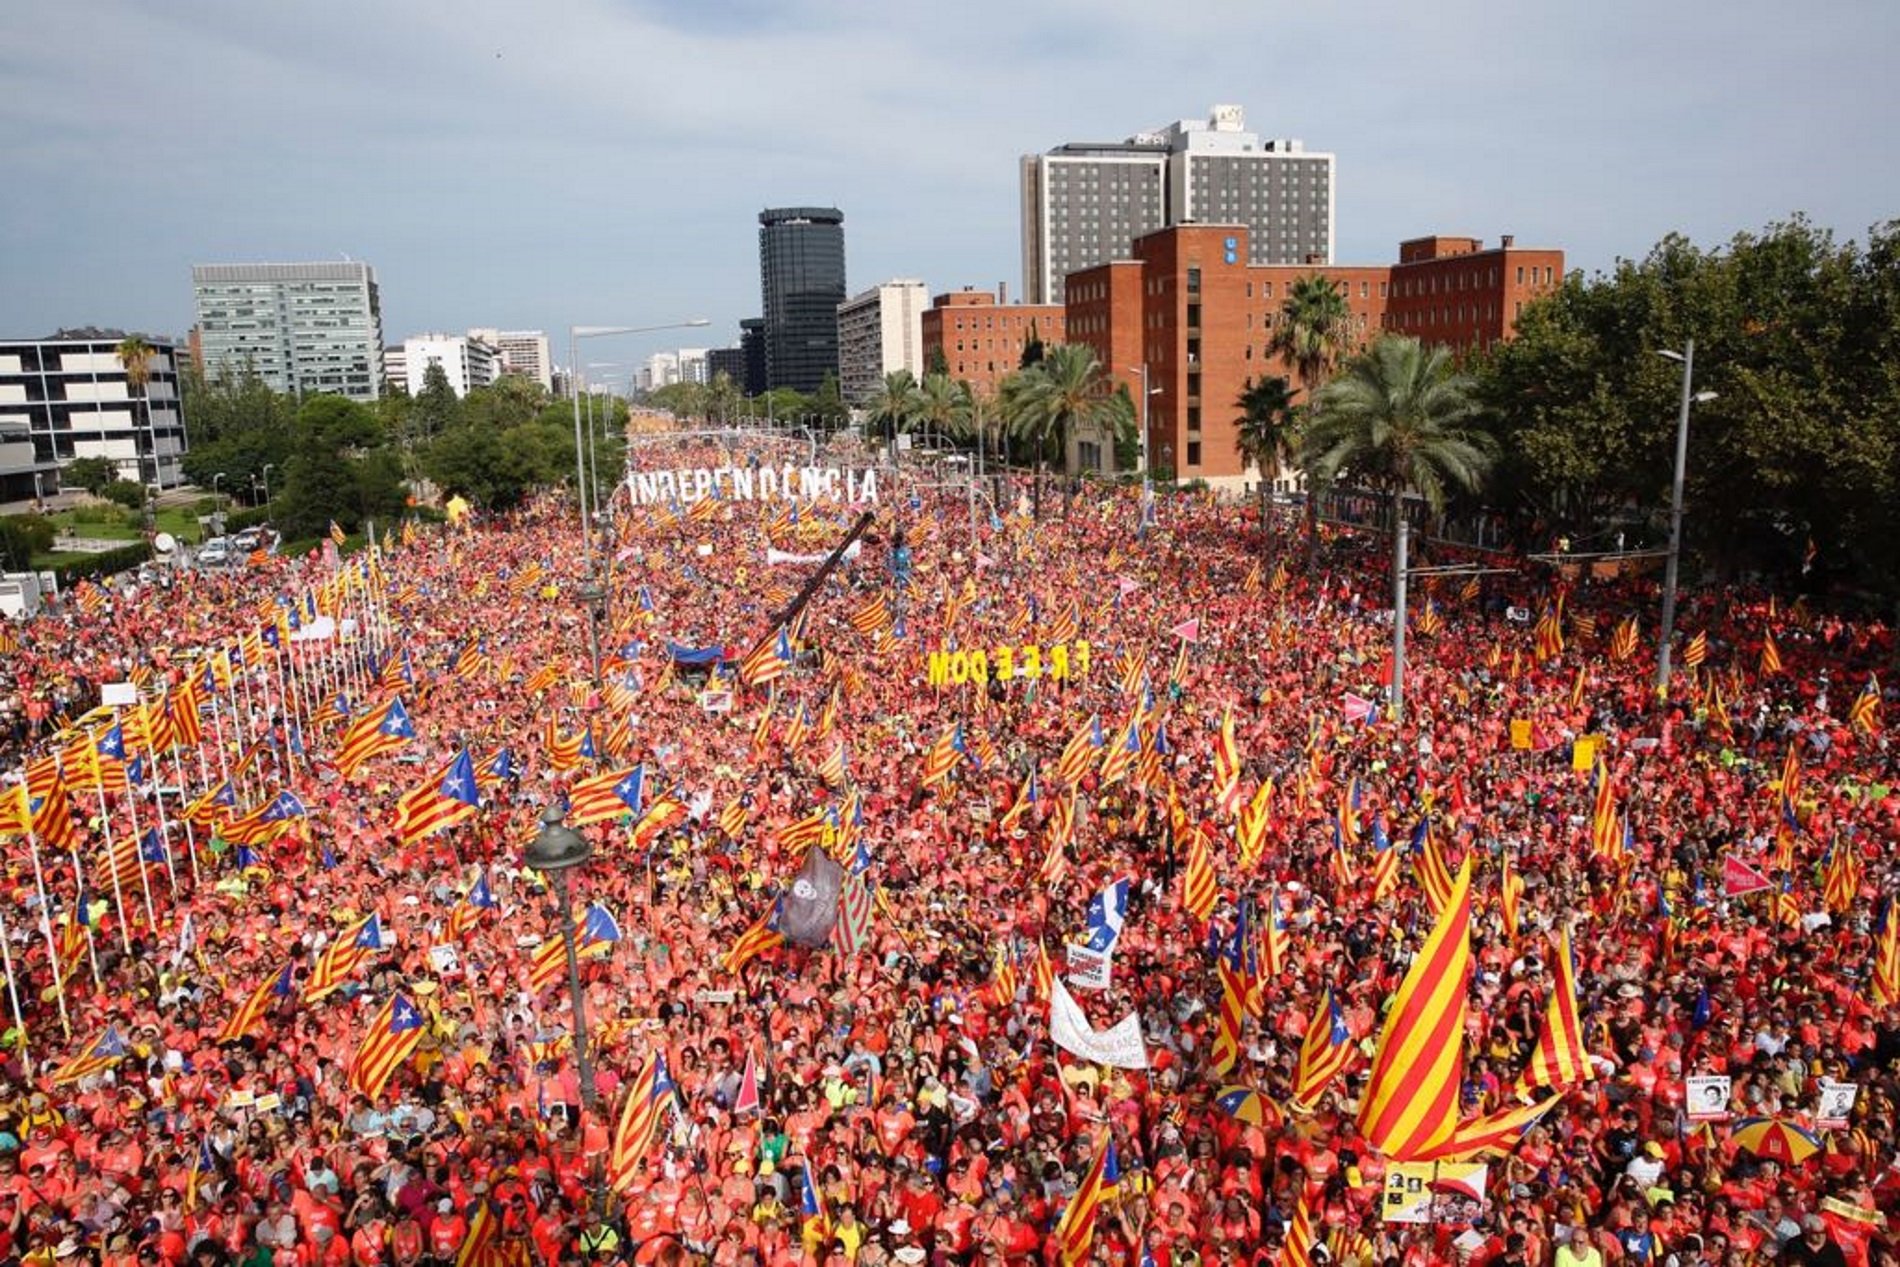 A million people in Catalan independence march, say Barcelona police